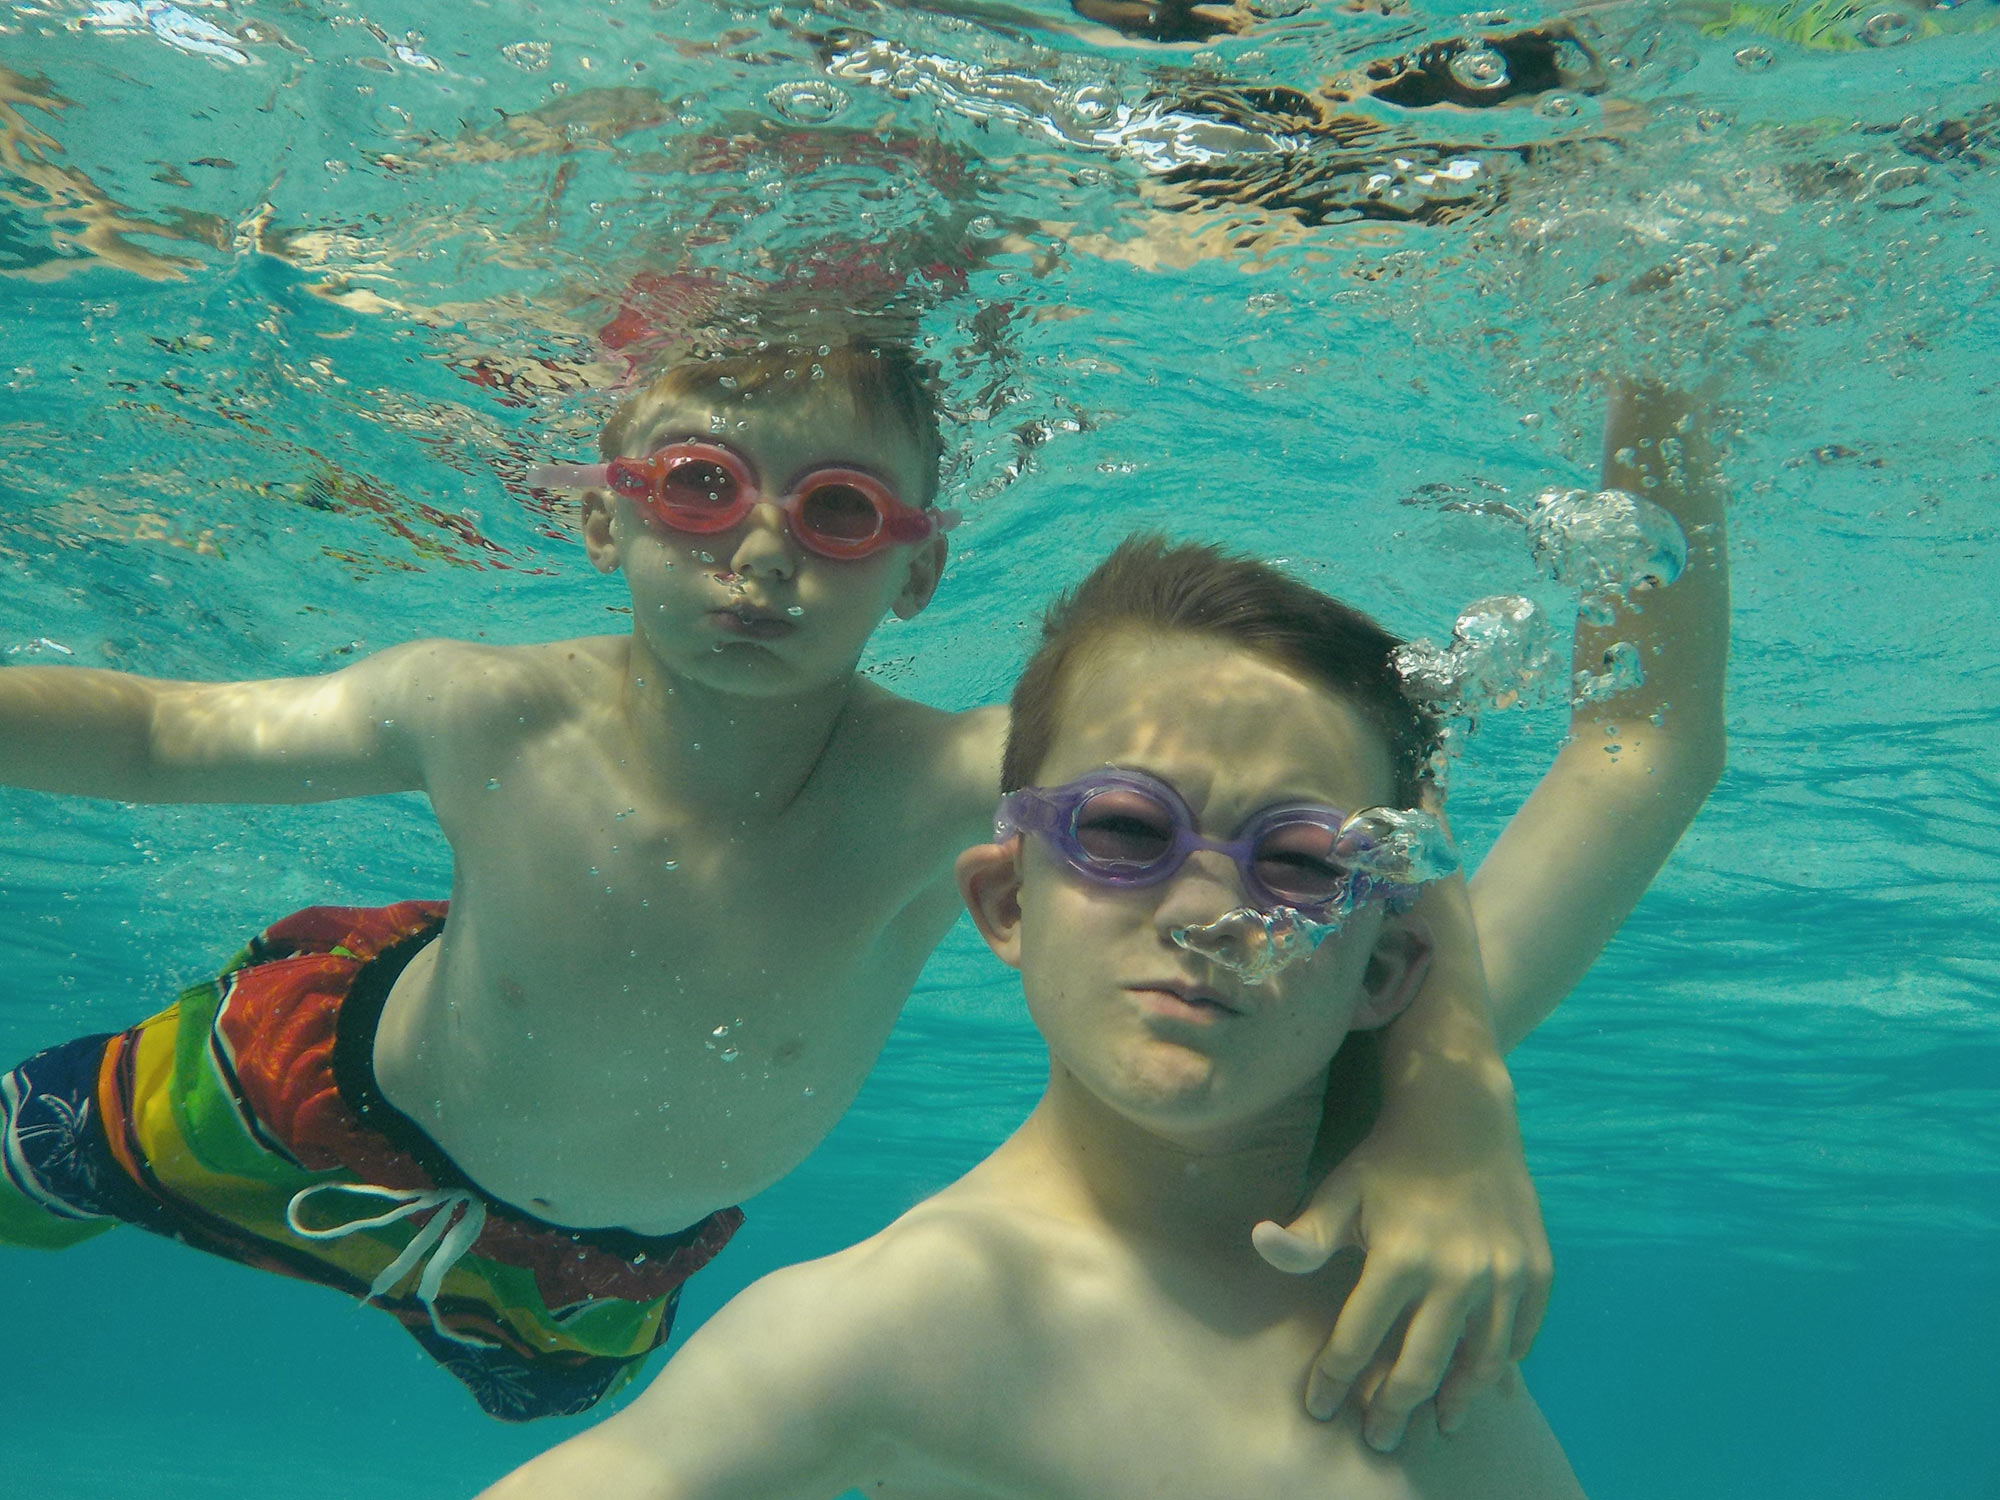 COOLPIX W150 photo of two boys underwater with goggles on